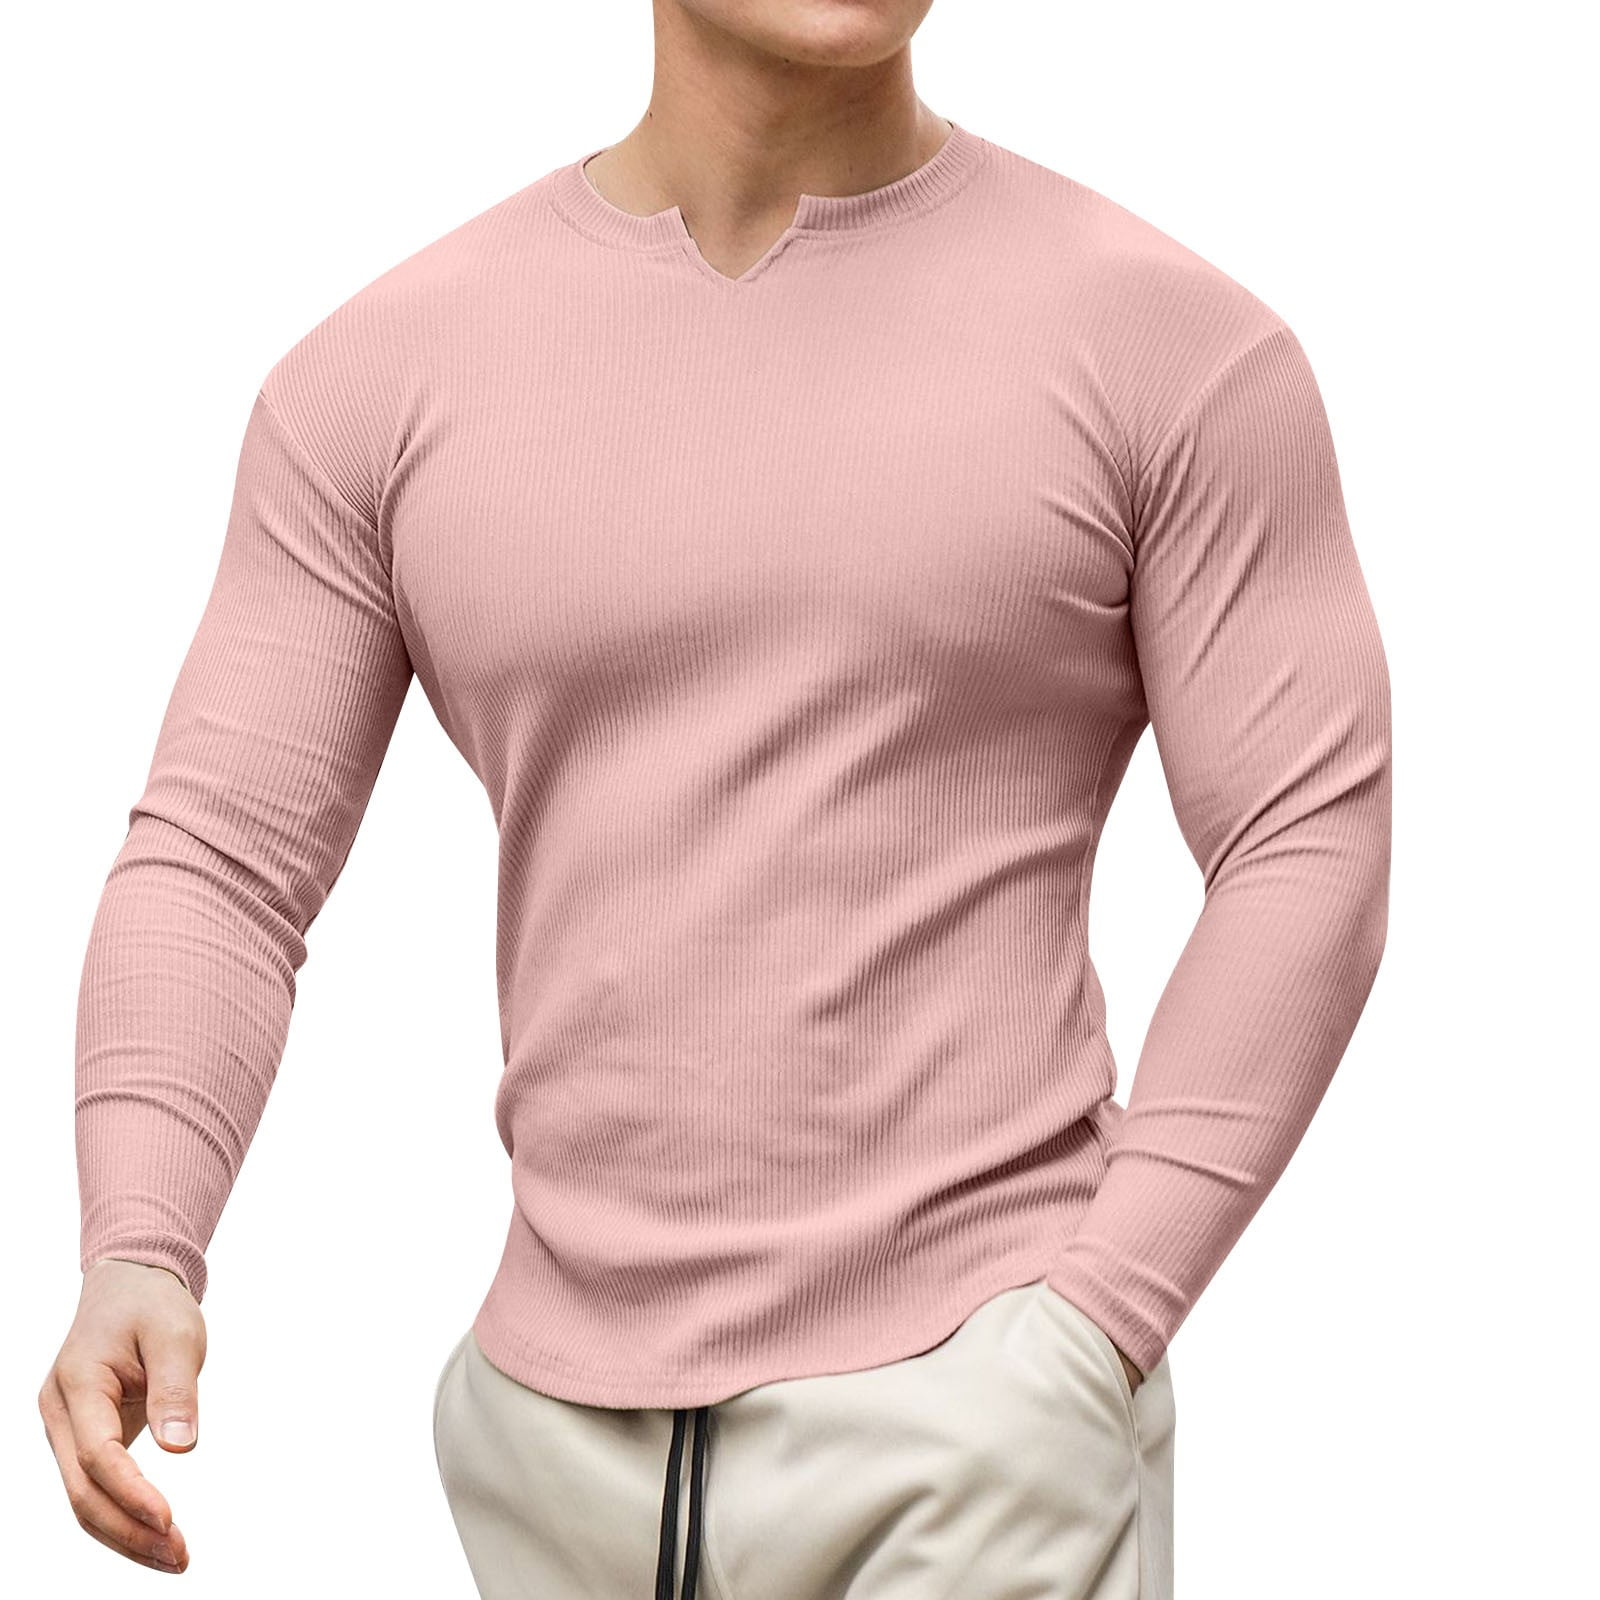 GWAABD Zipper Shirts Men Male Spring and Summer V Neck Tops with